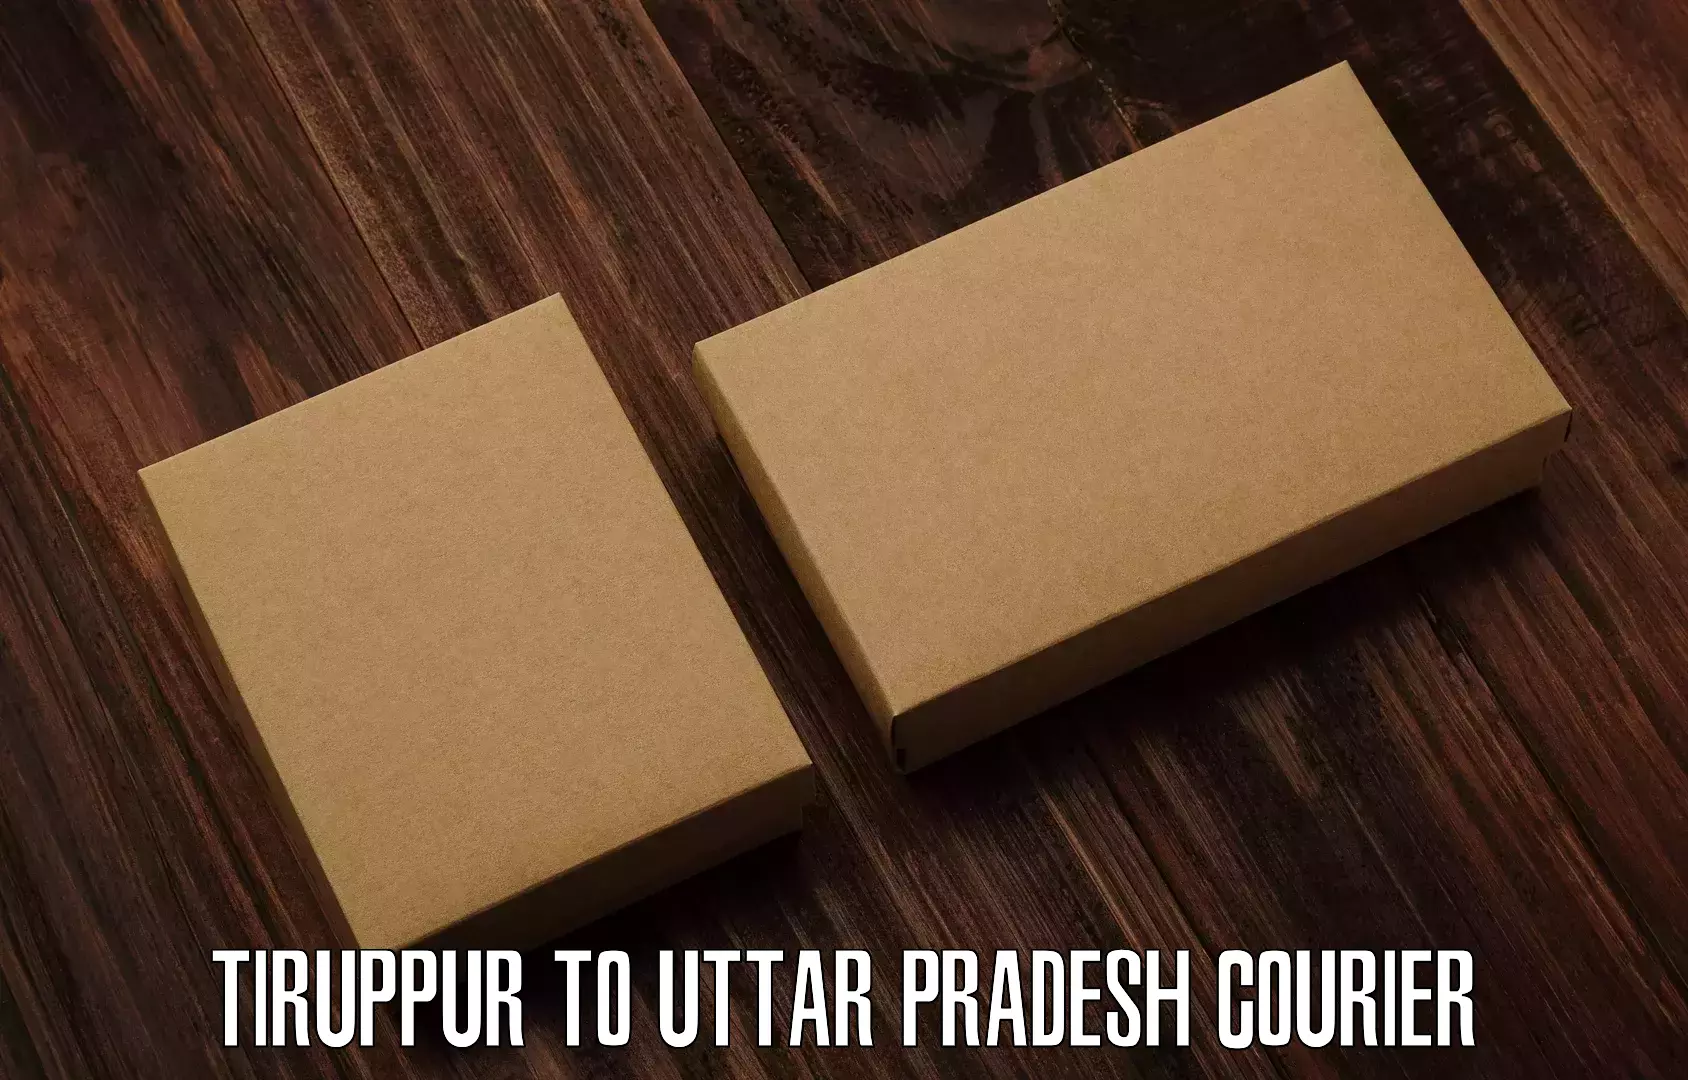 Next-day delivery options Tiruppur to Varanasi